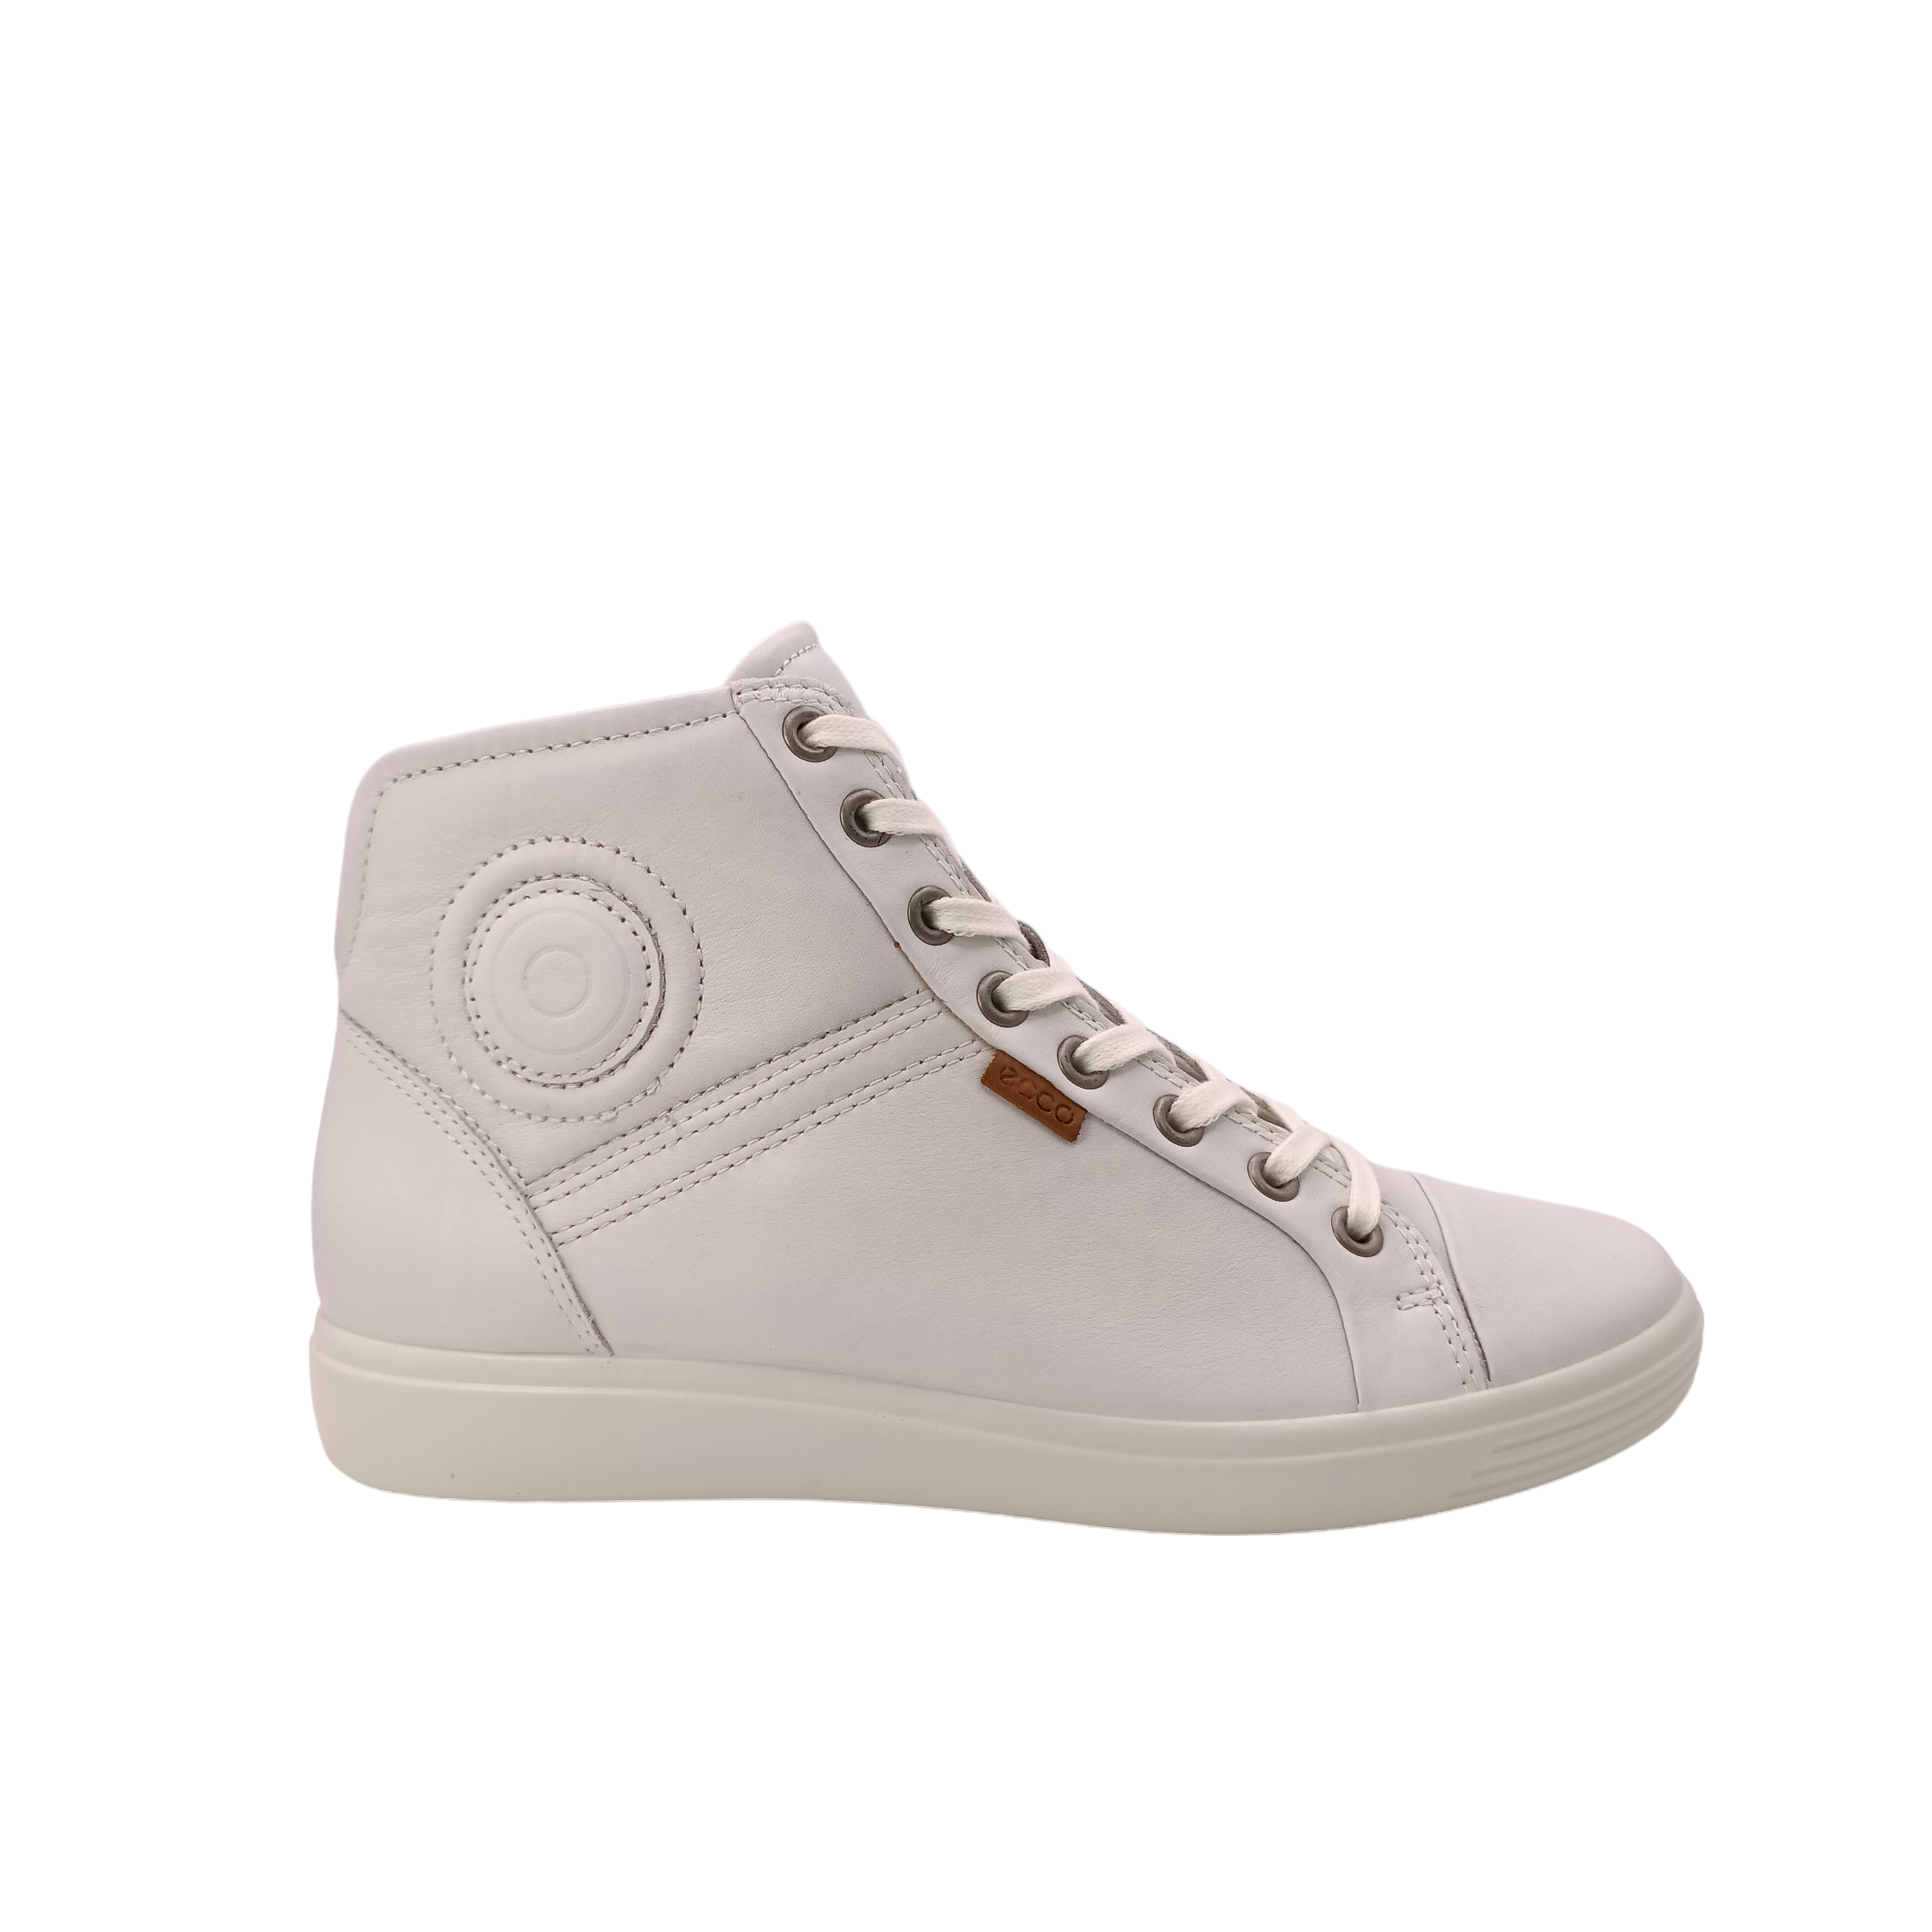 White Circle pattern on side top with a v shape heel Shop Womens Hi-cut white sneaker from Ecco.  View of side white leather sneaker with white laces. Shop shoe&amp;me Mount Maunganui NZ.